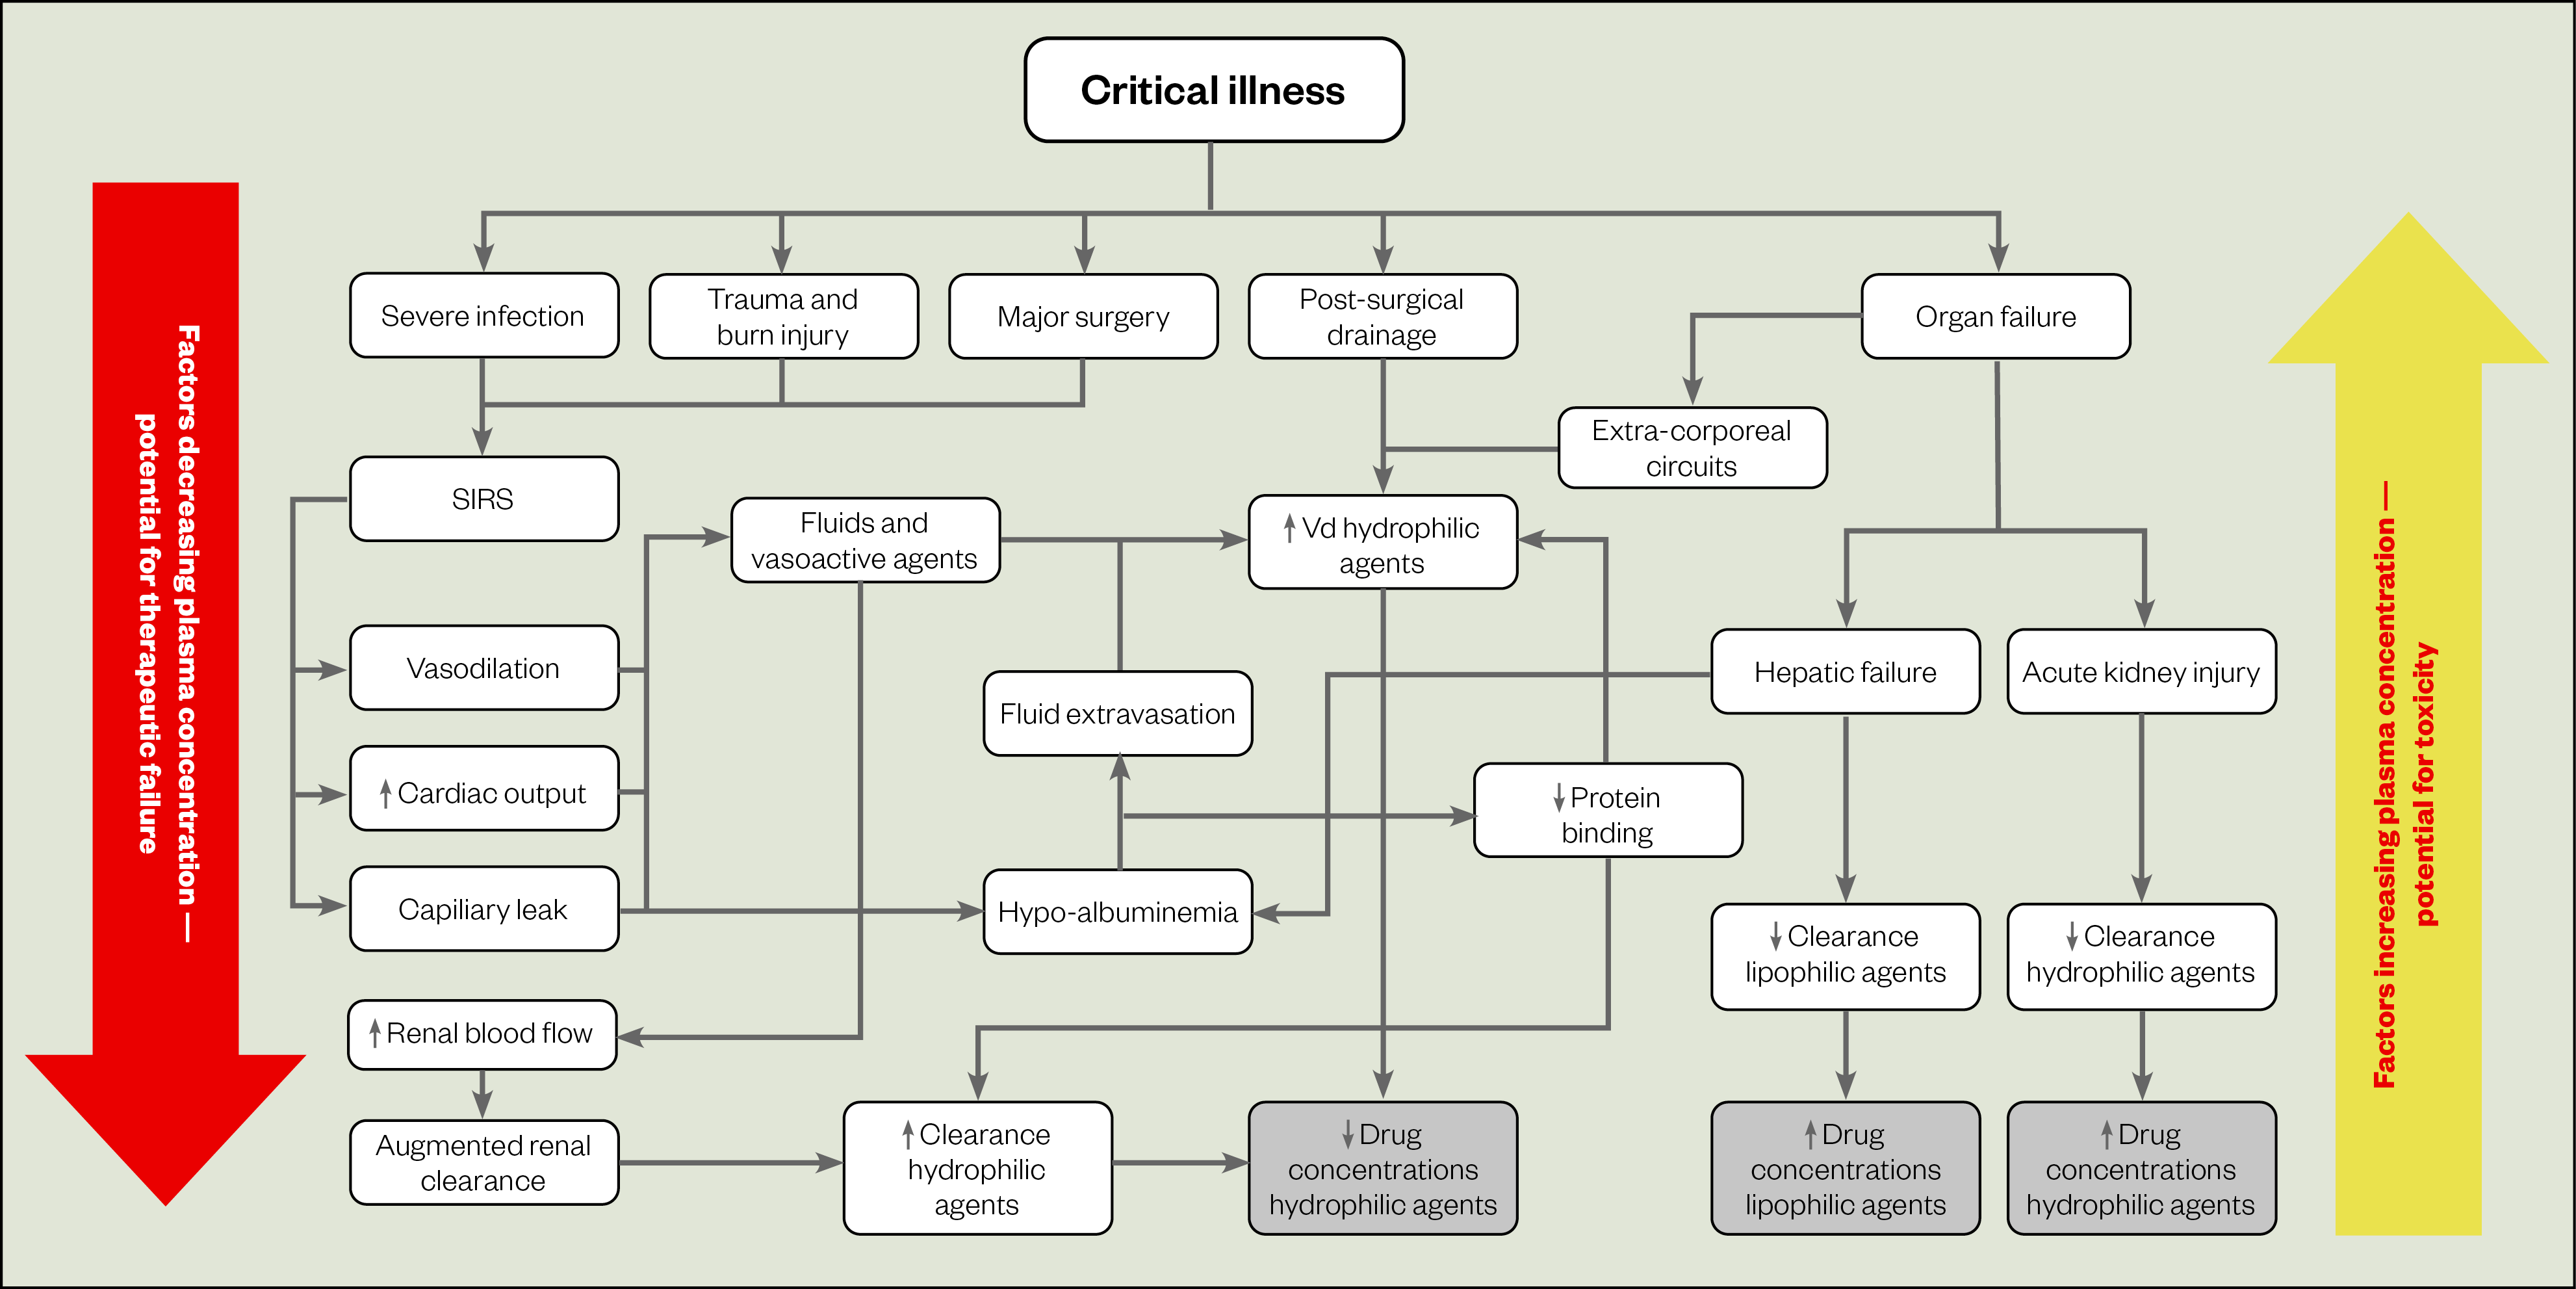 Figure 1: Critical illness-induced pharmacokinetic changes.
SIRS: Systemic inflammatory response syndrome
Source: Adapted from Blot et al.